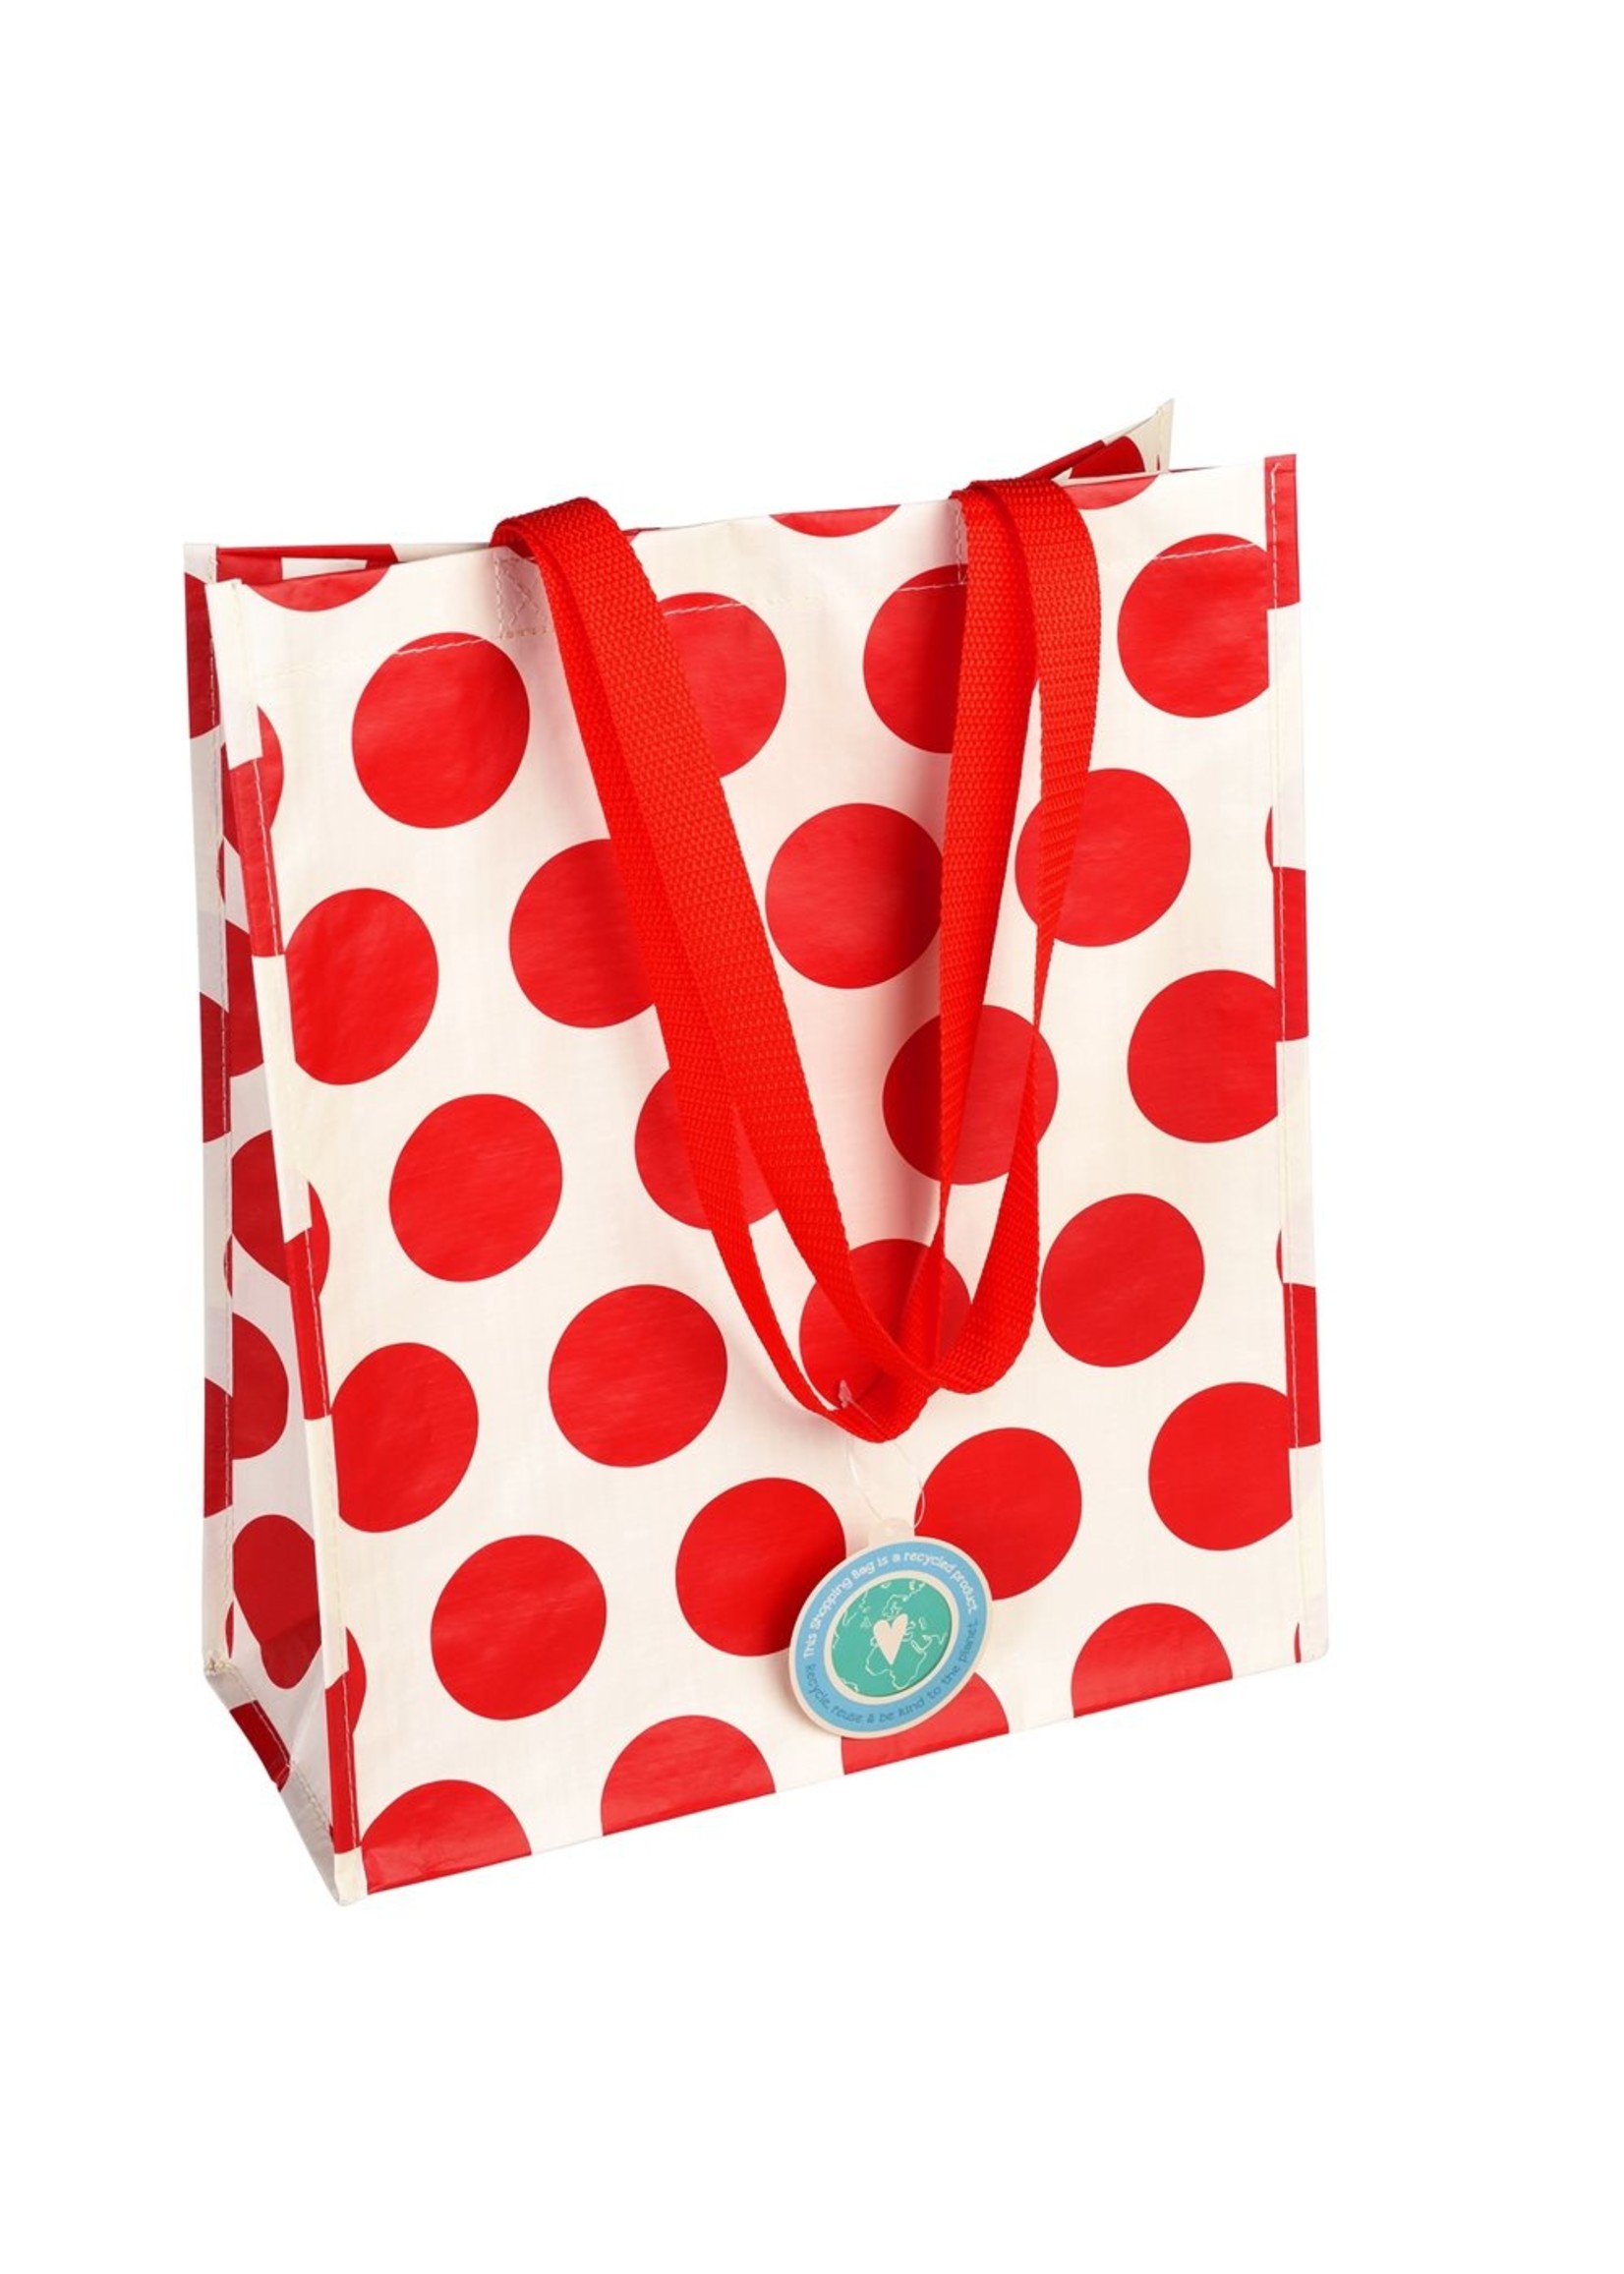 Rex London Shopper 40x34 cm recycled plastic white with red dots